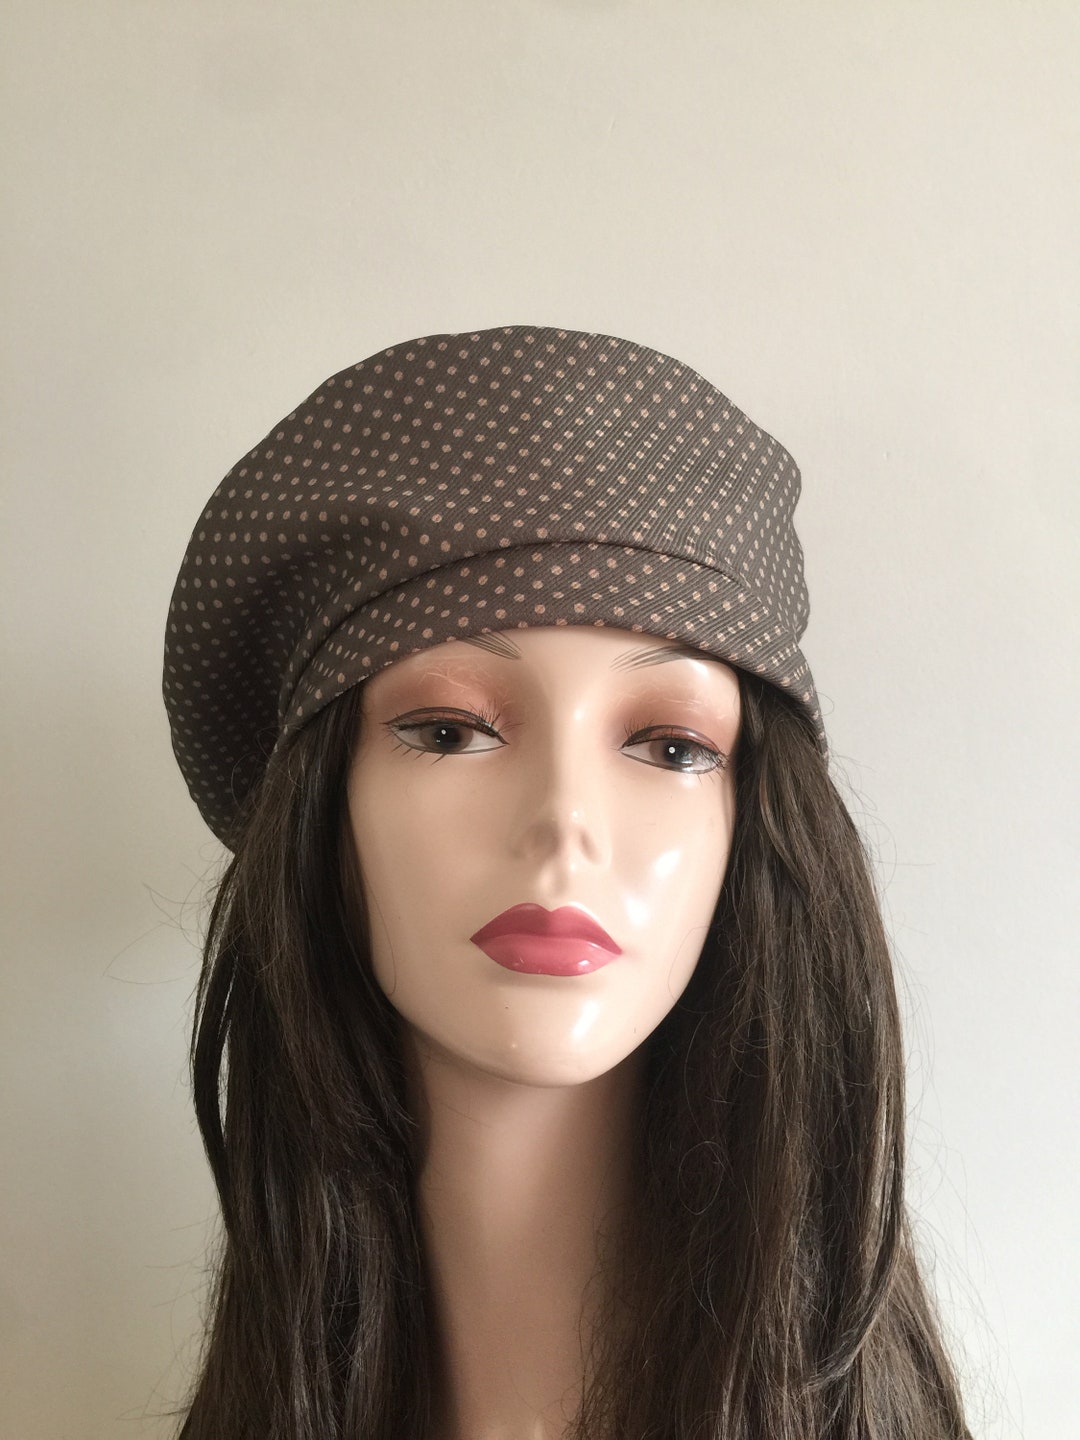 Summer Beret Hat Summer Spring Beanie Polka Dot Couture - Etsy